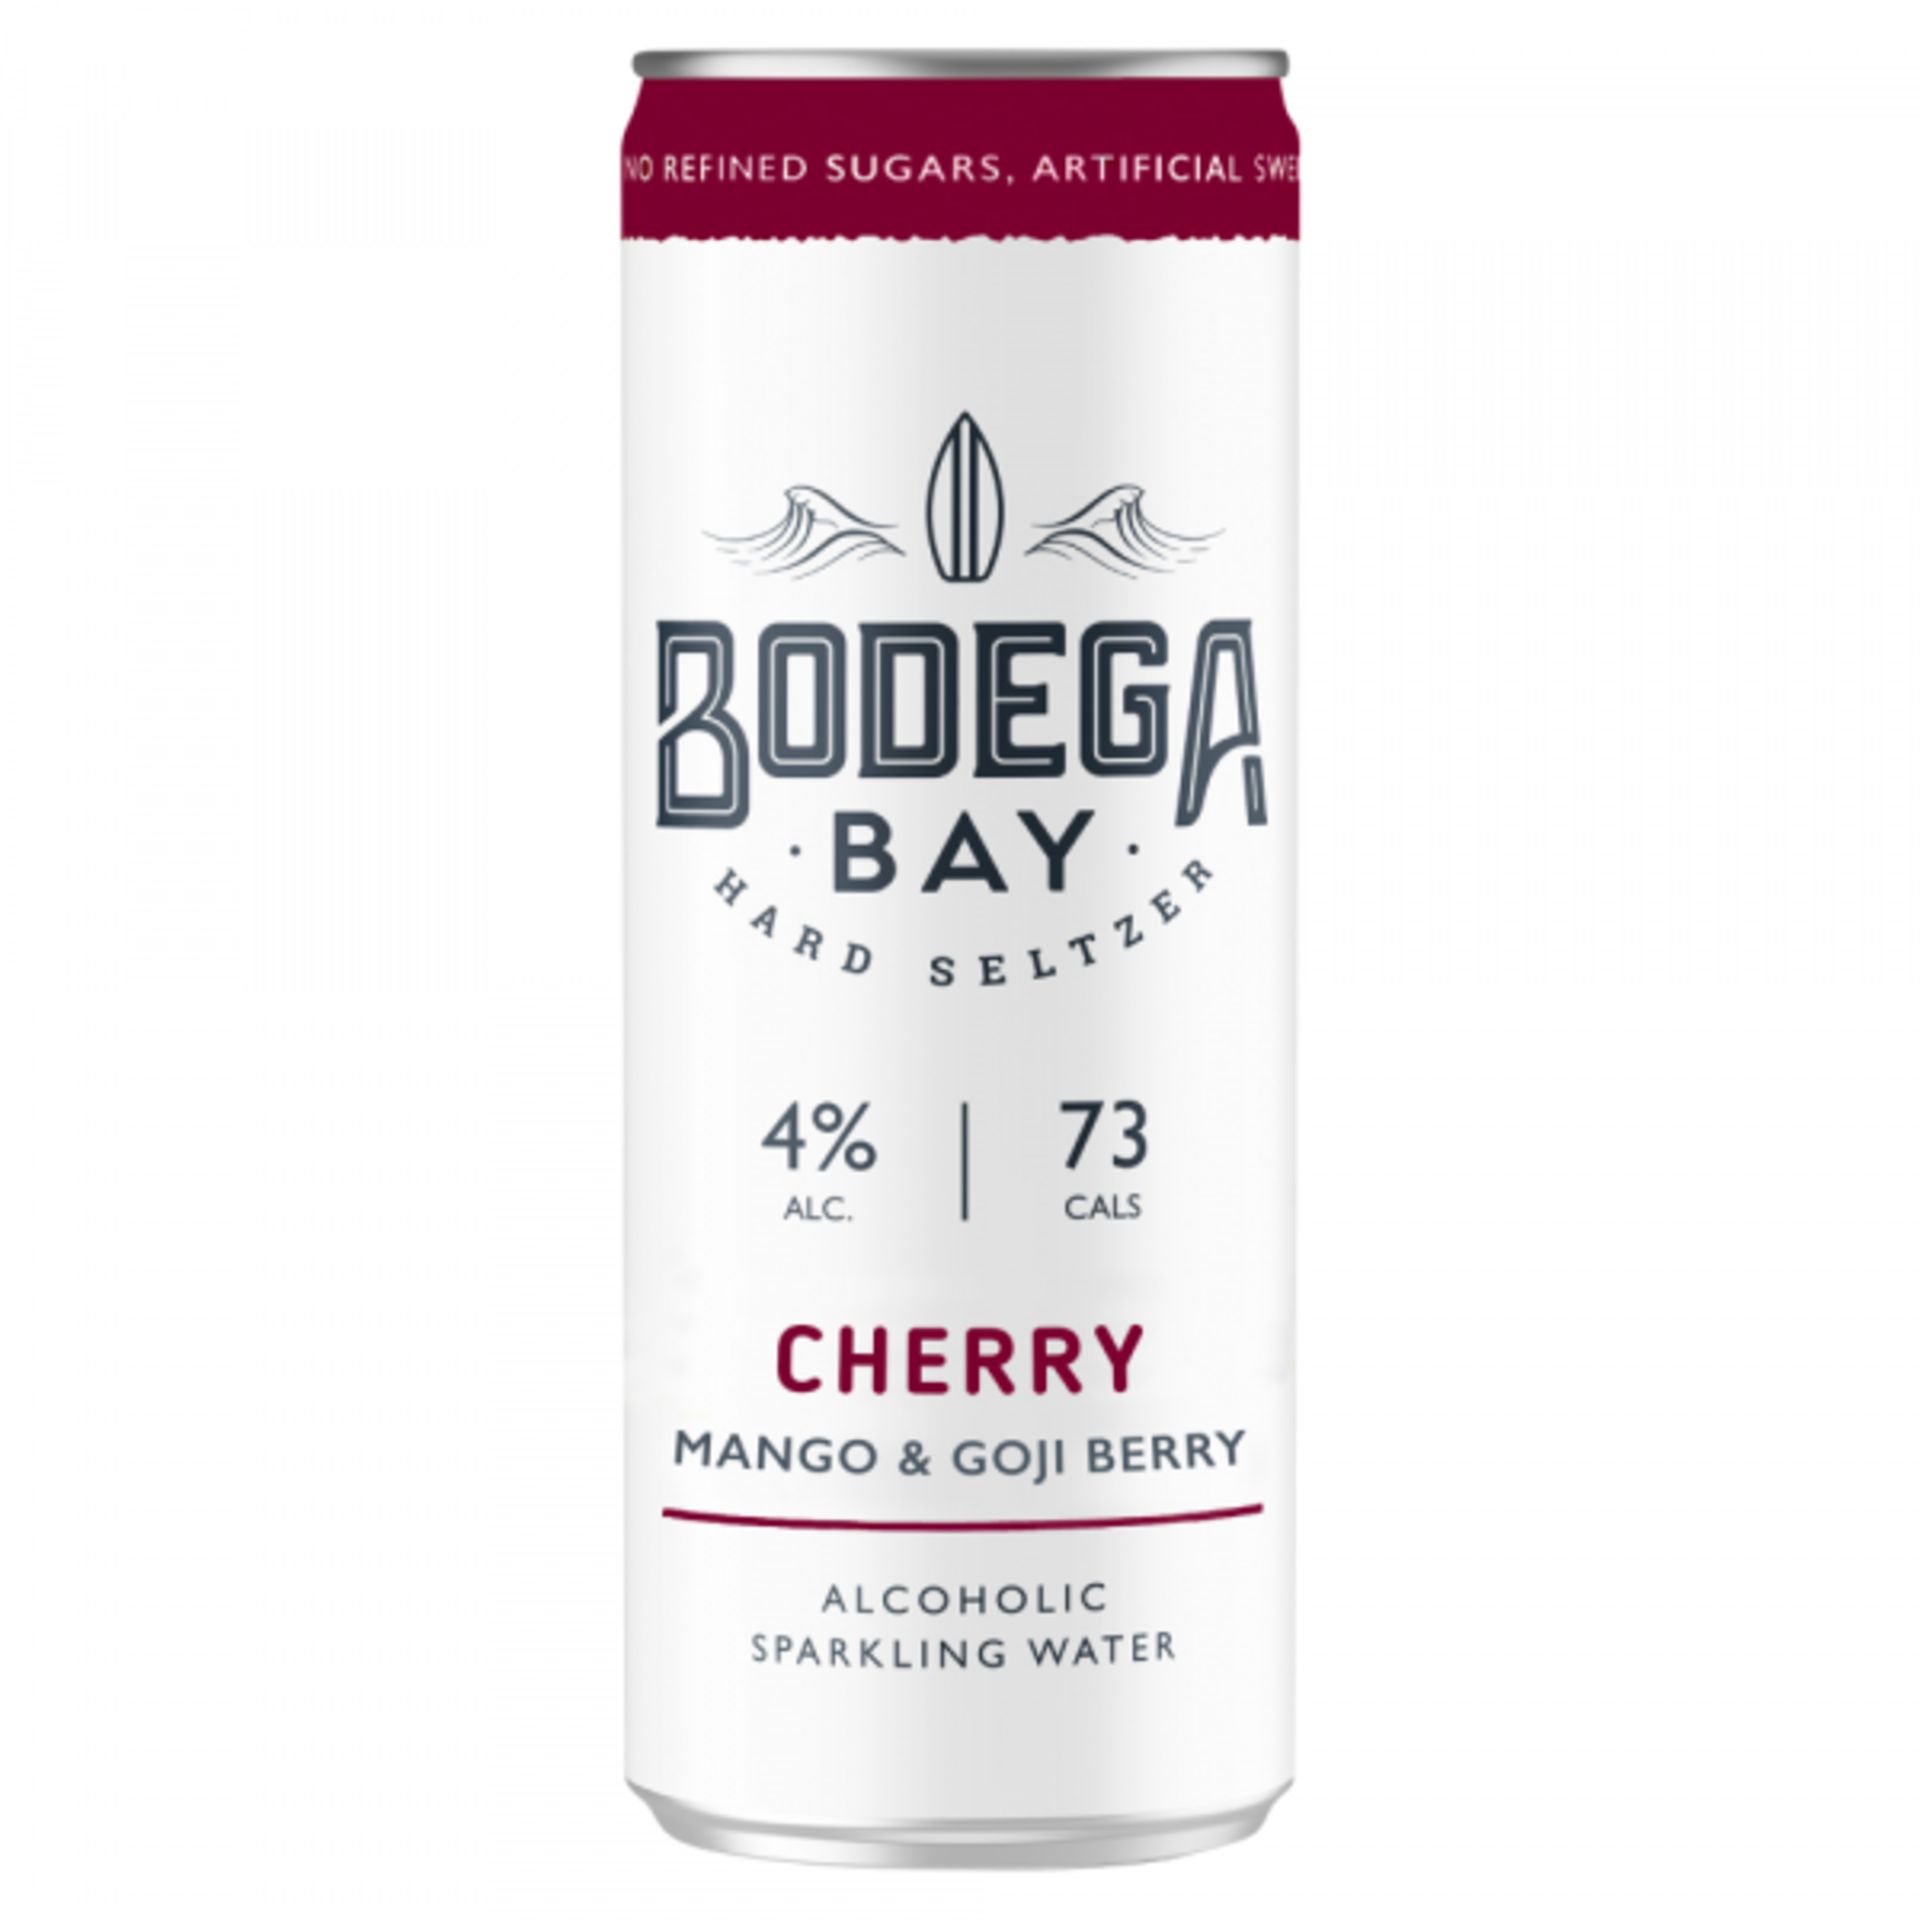 360 x Cans of Bodega Bay Hard Seltzer 250ml Alcoholic Sparkling Water Drinks - Various Flavours - Image 3 of 20